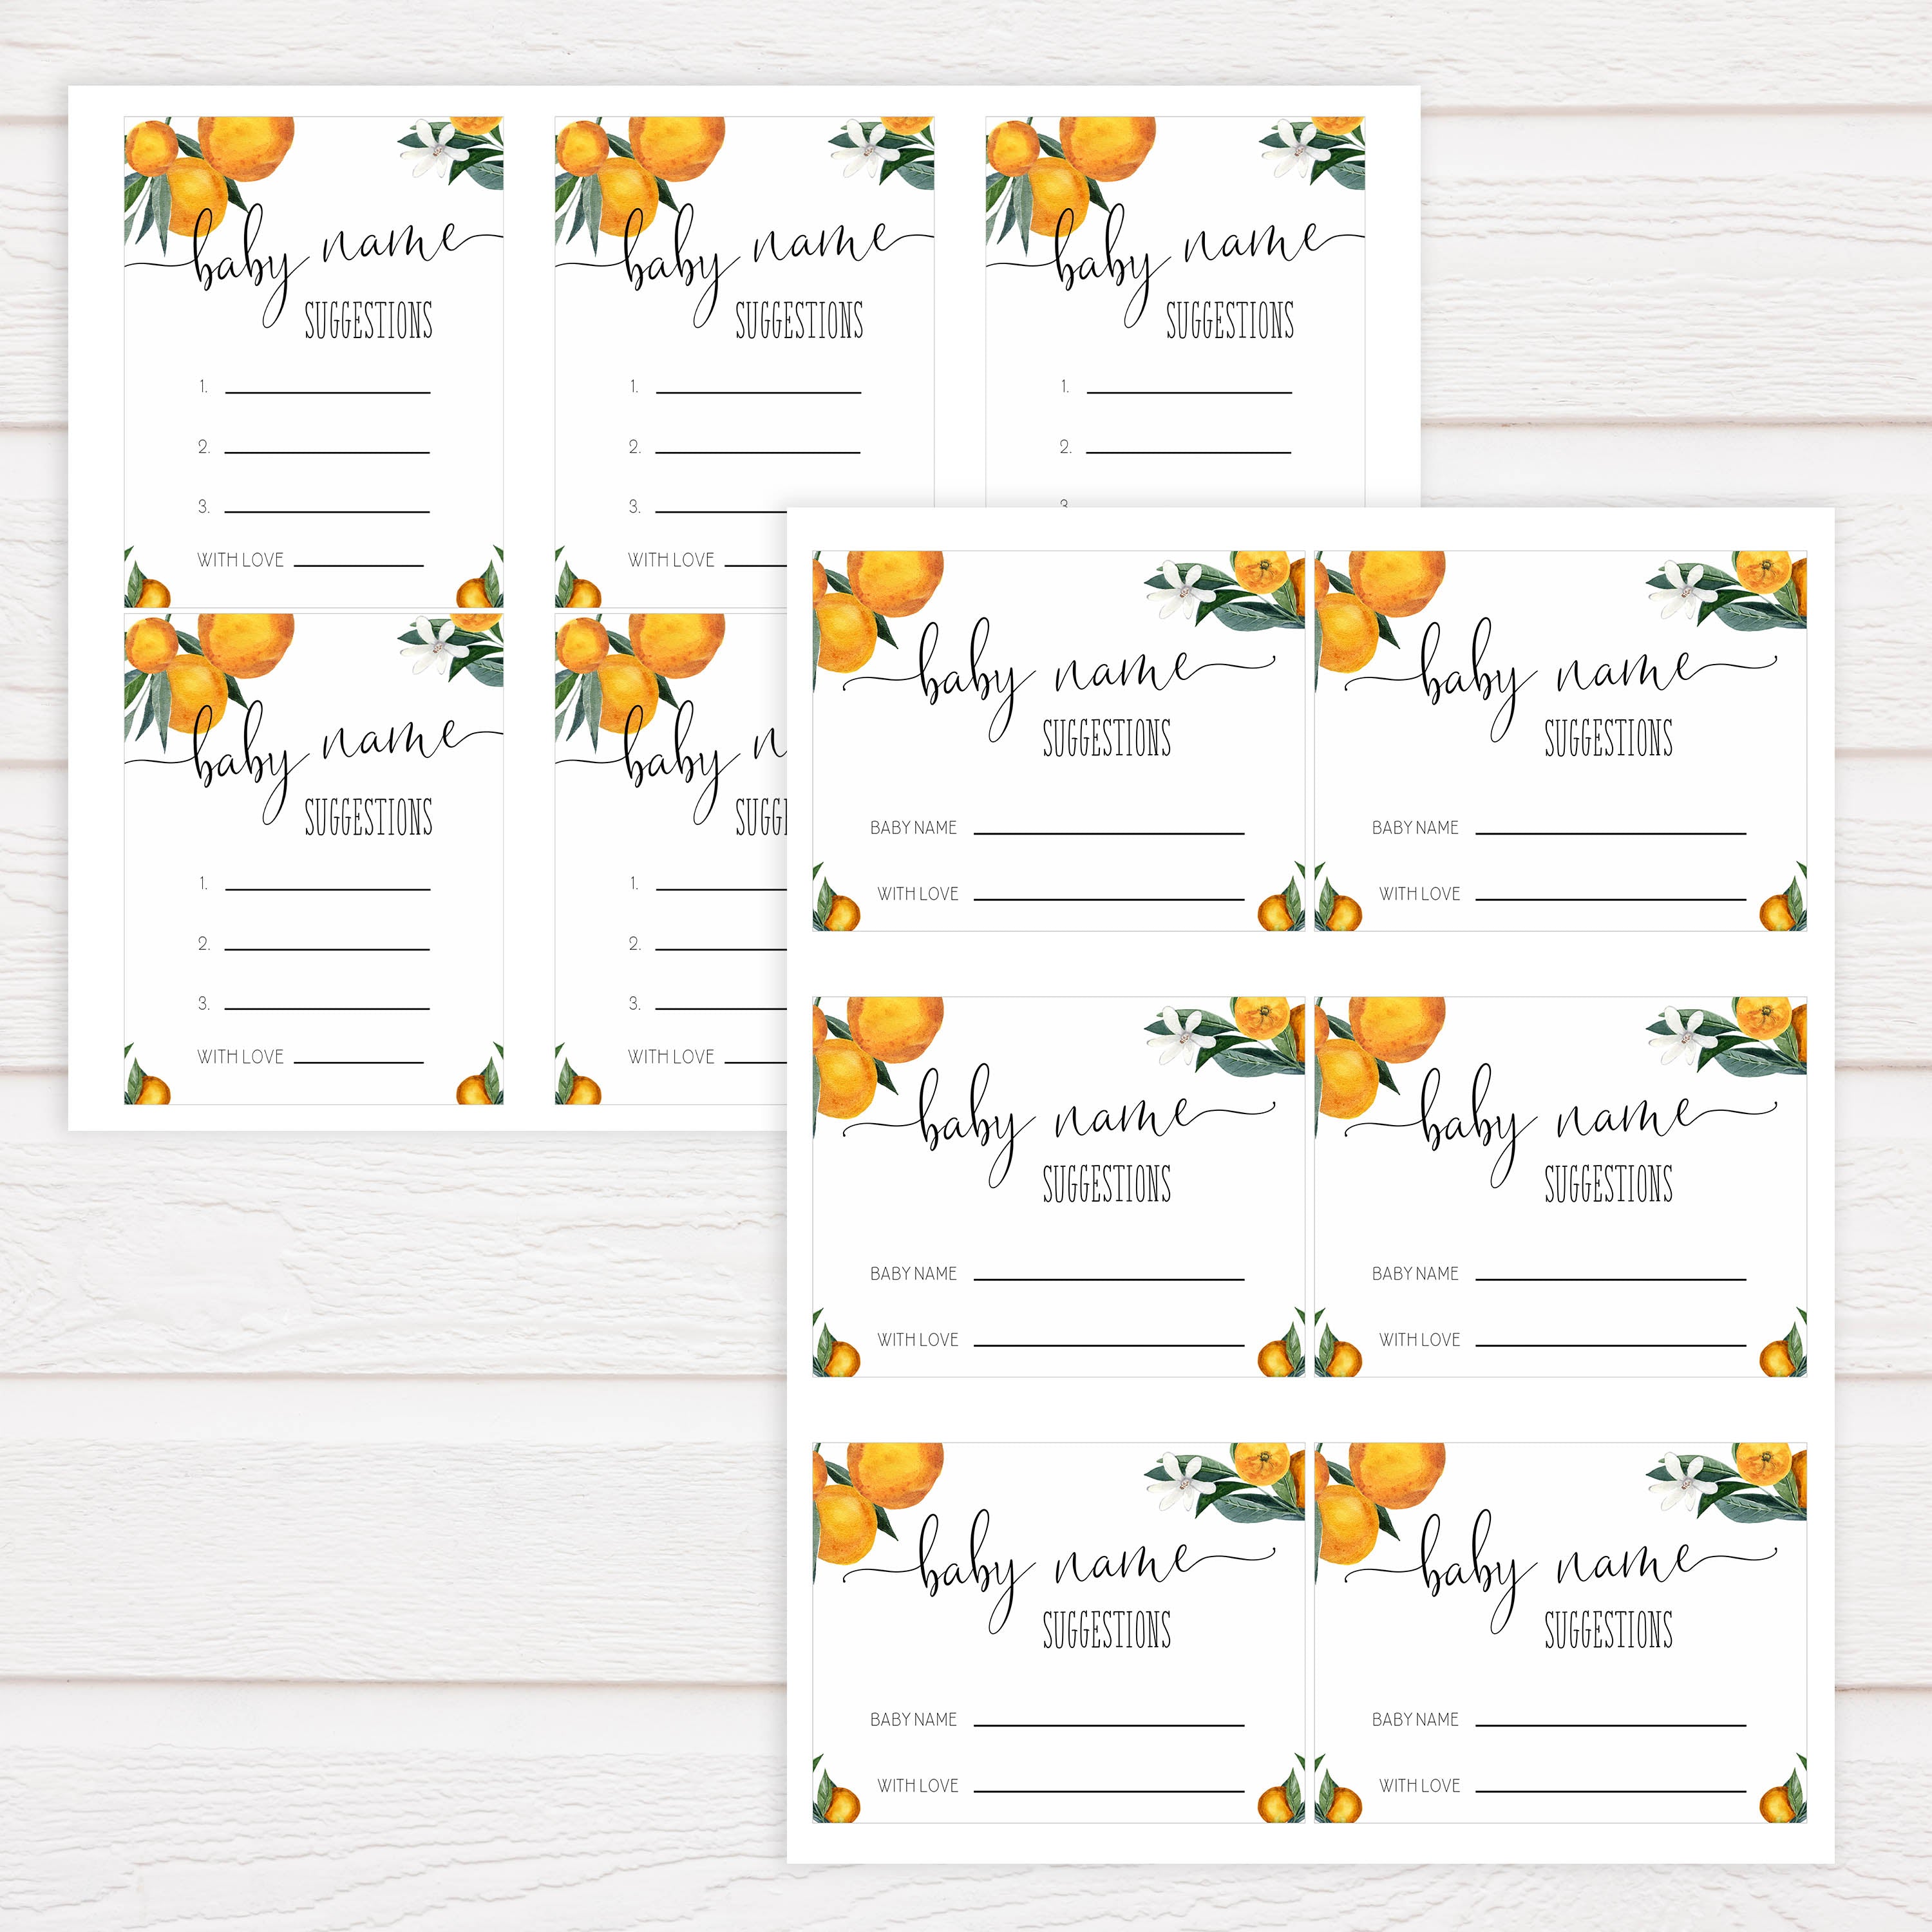 baby name suggestions game, Printable baby shower games, little cutie baby games, baby shower games, fun baby shower ideas, top baby shower ideas, little cutie baby shower, baby shower games, fun little cutie baby shower ideas, citrus baby shower games, citrus baby shower, orange baby shower